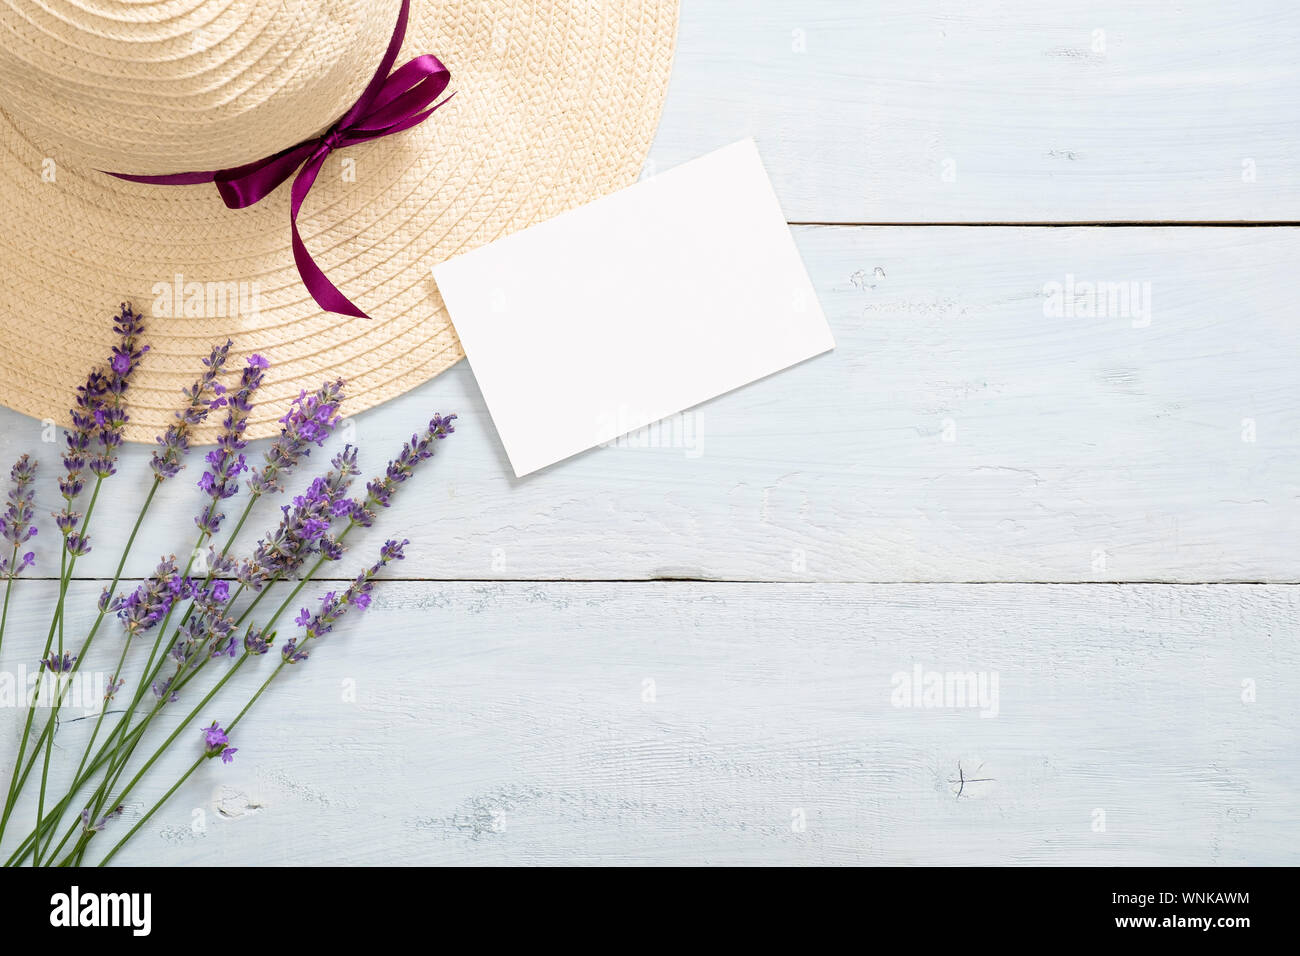 Daisy lavender flowers, straw hat, blank paper card mockup on rustic wooden background. Minimal flat lay style composition, top view, copy space. Summ Stock Photo